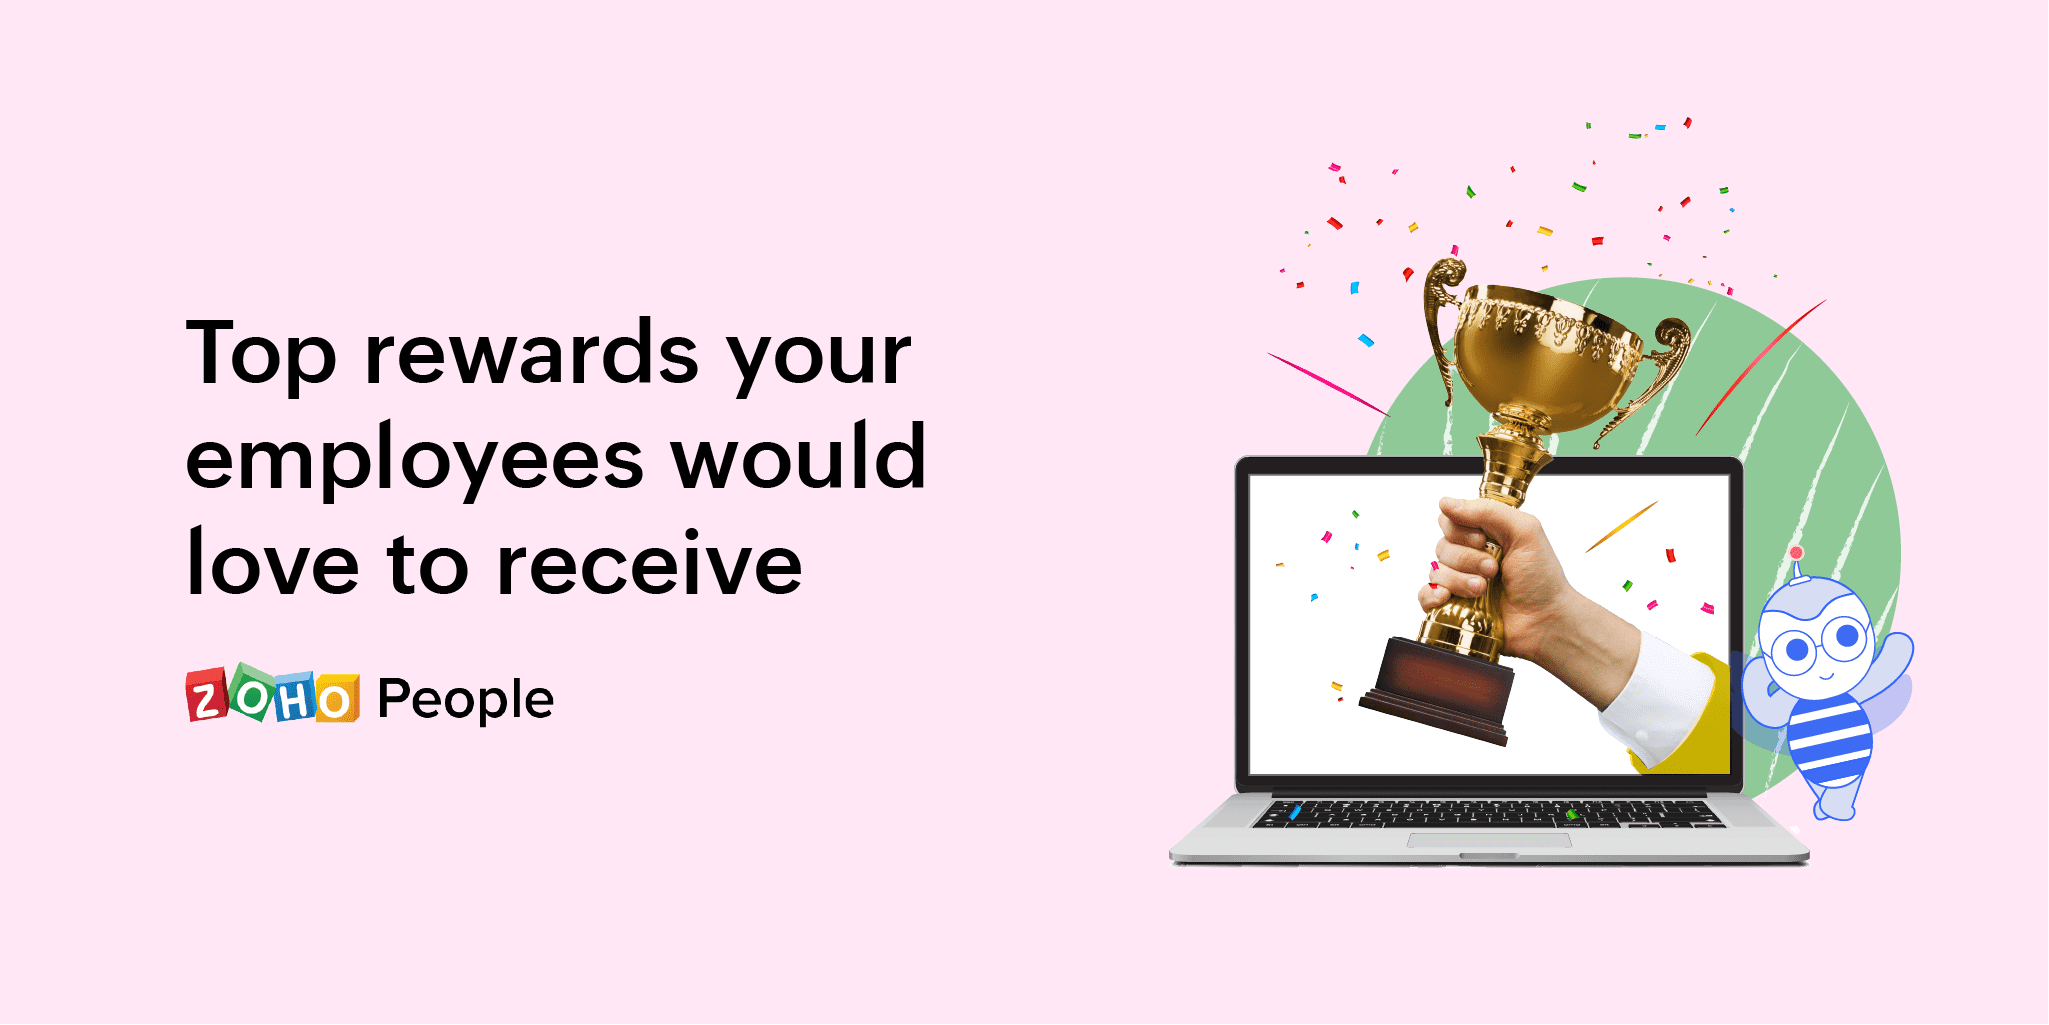 Rewards you should include in your next employee recognition program